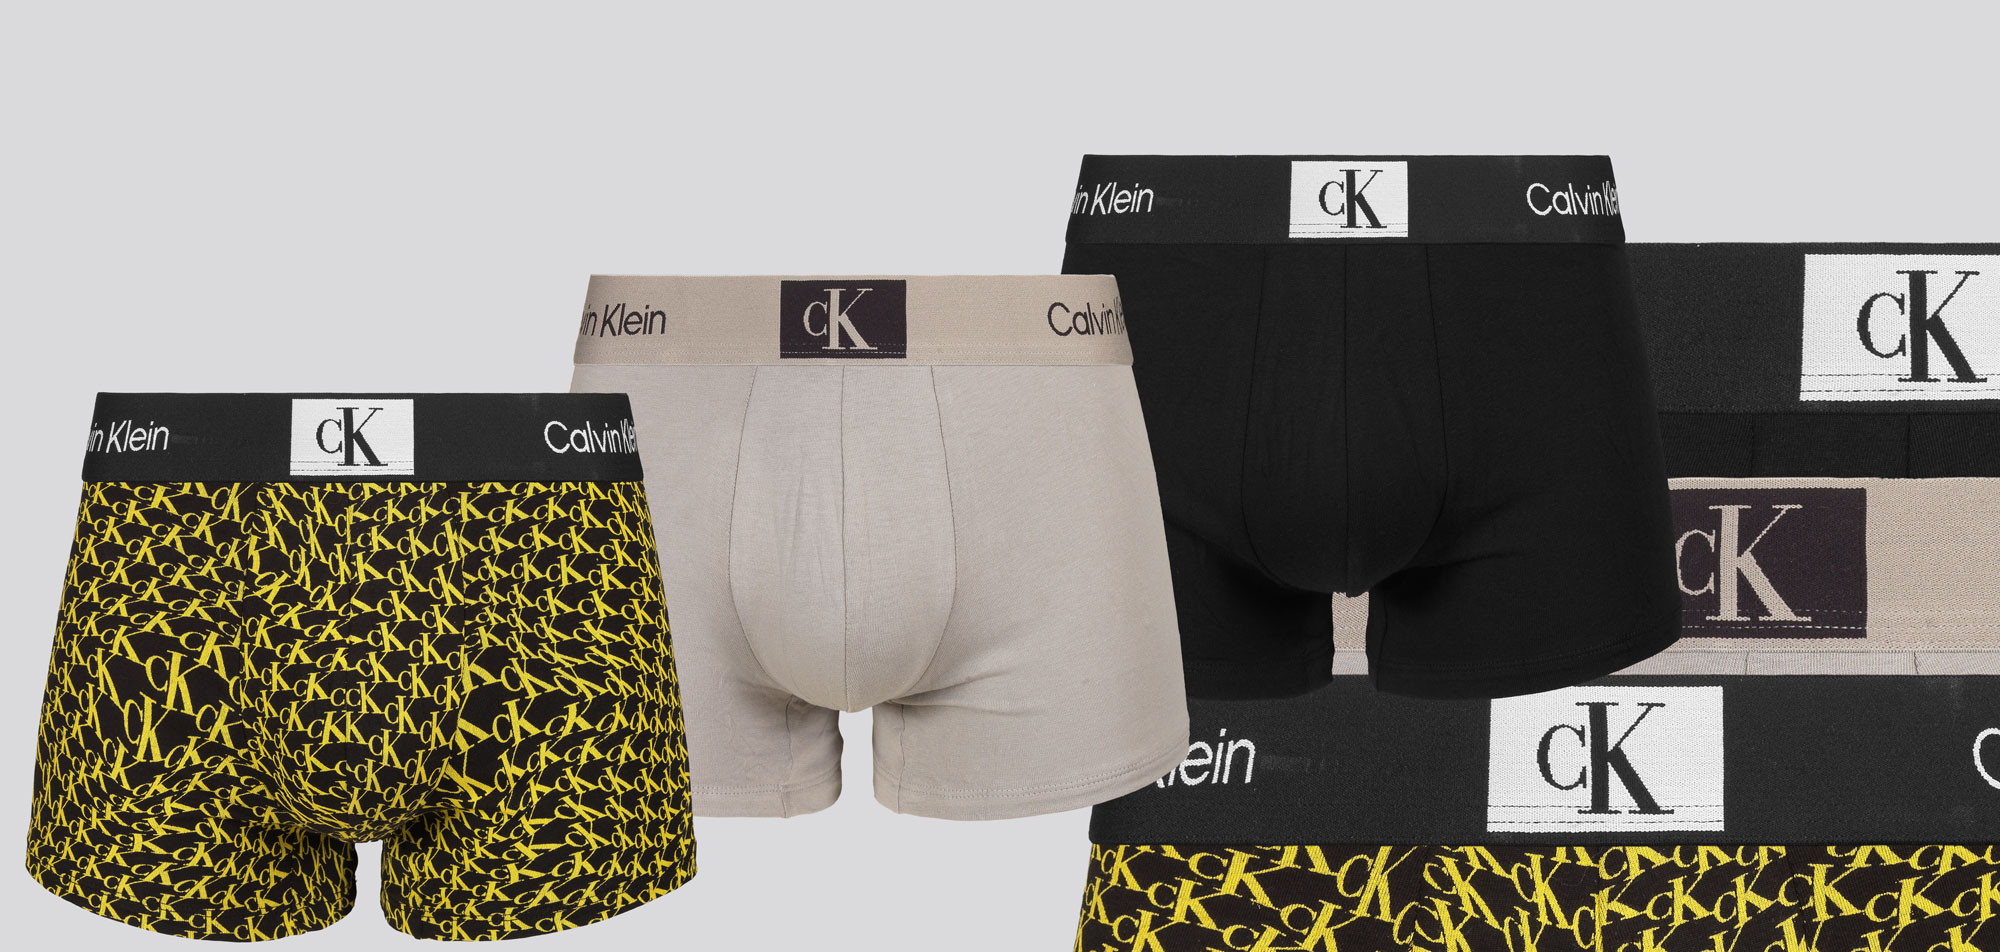 Calvin Klein Trunk 3-Pack NB3528A 1996, color Nee